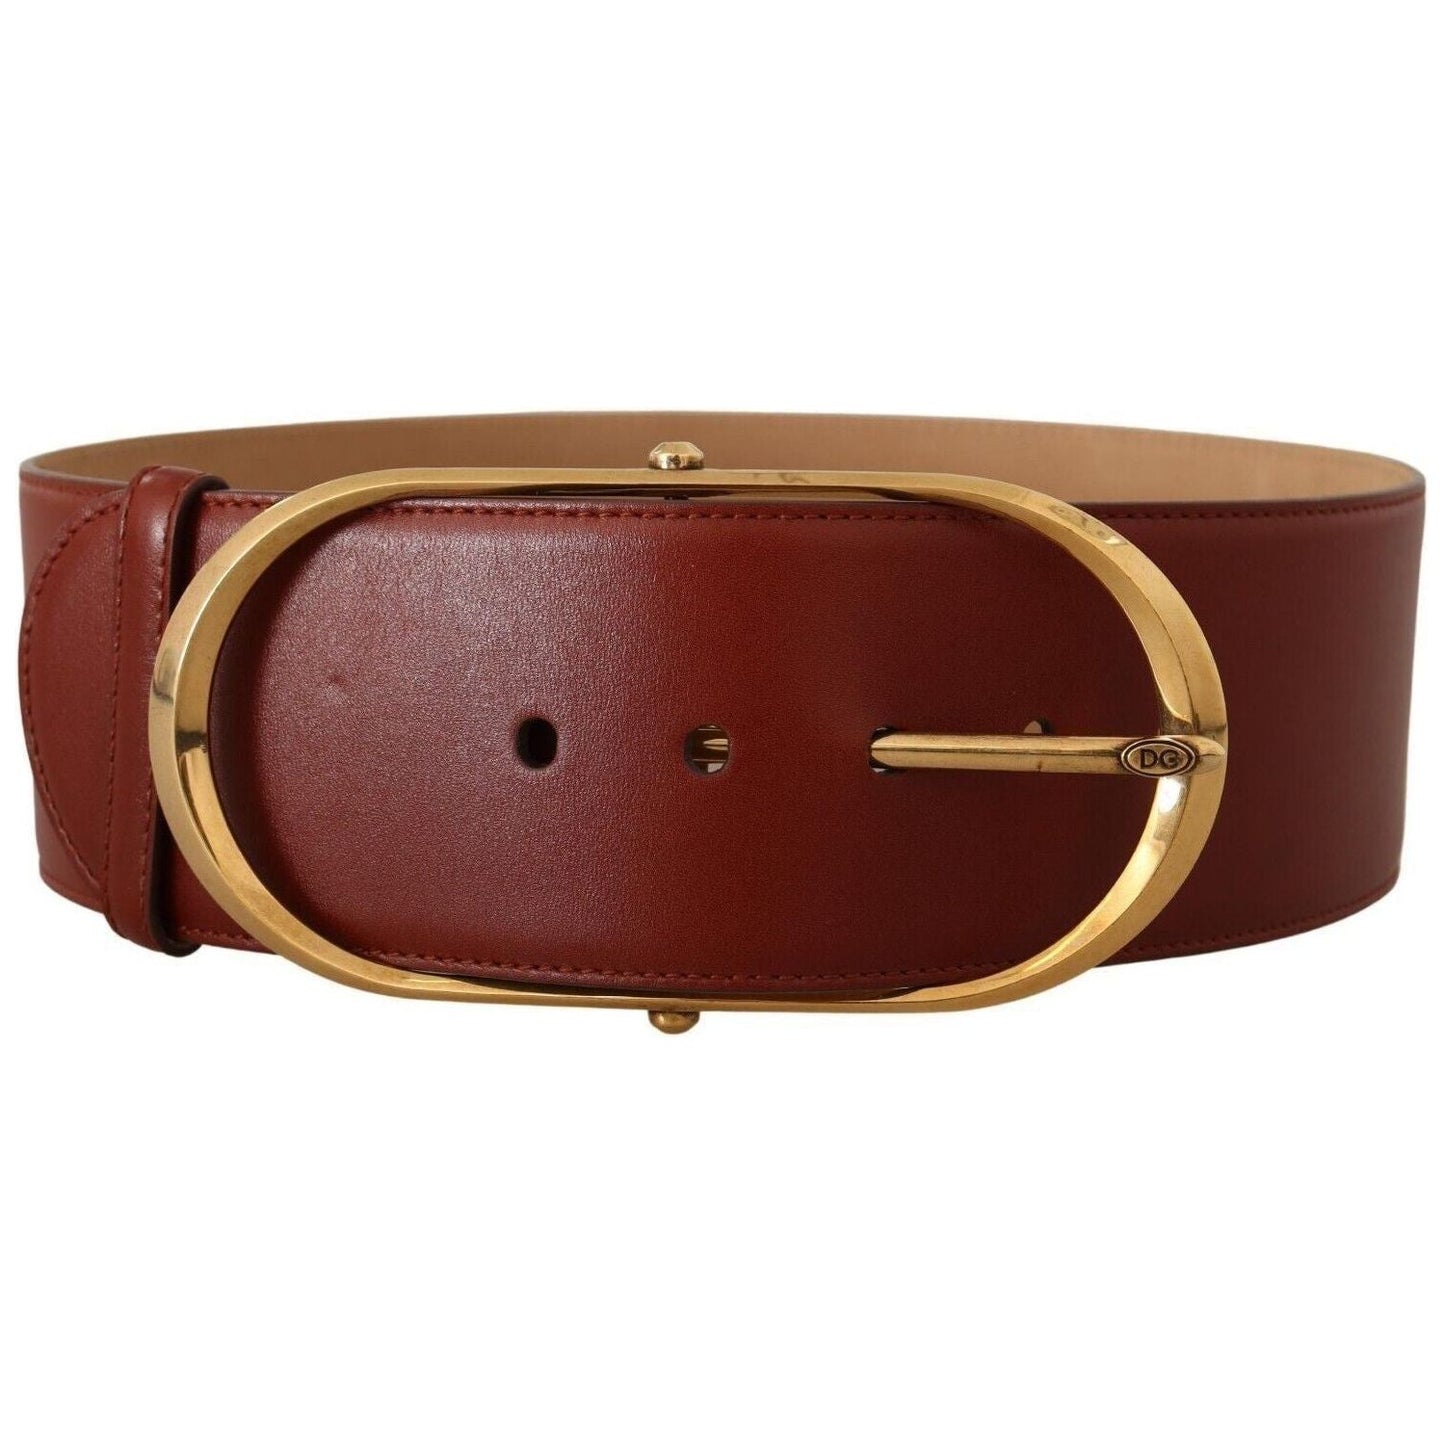 Dolce & Gabbana Elegant Maroon Leather Belt with Gold Accents WOMAN BELTS maroon-leather-gold-metal-oval-buckle-belt-1